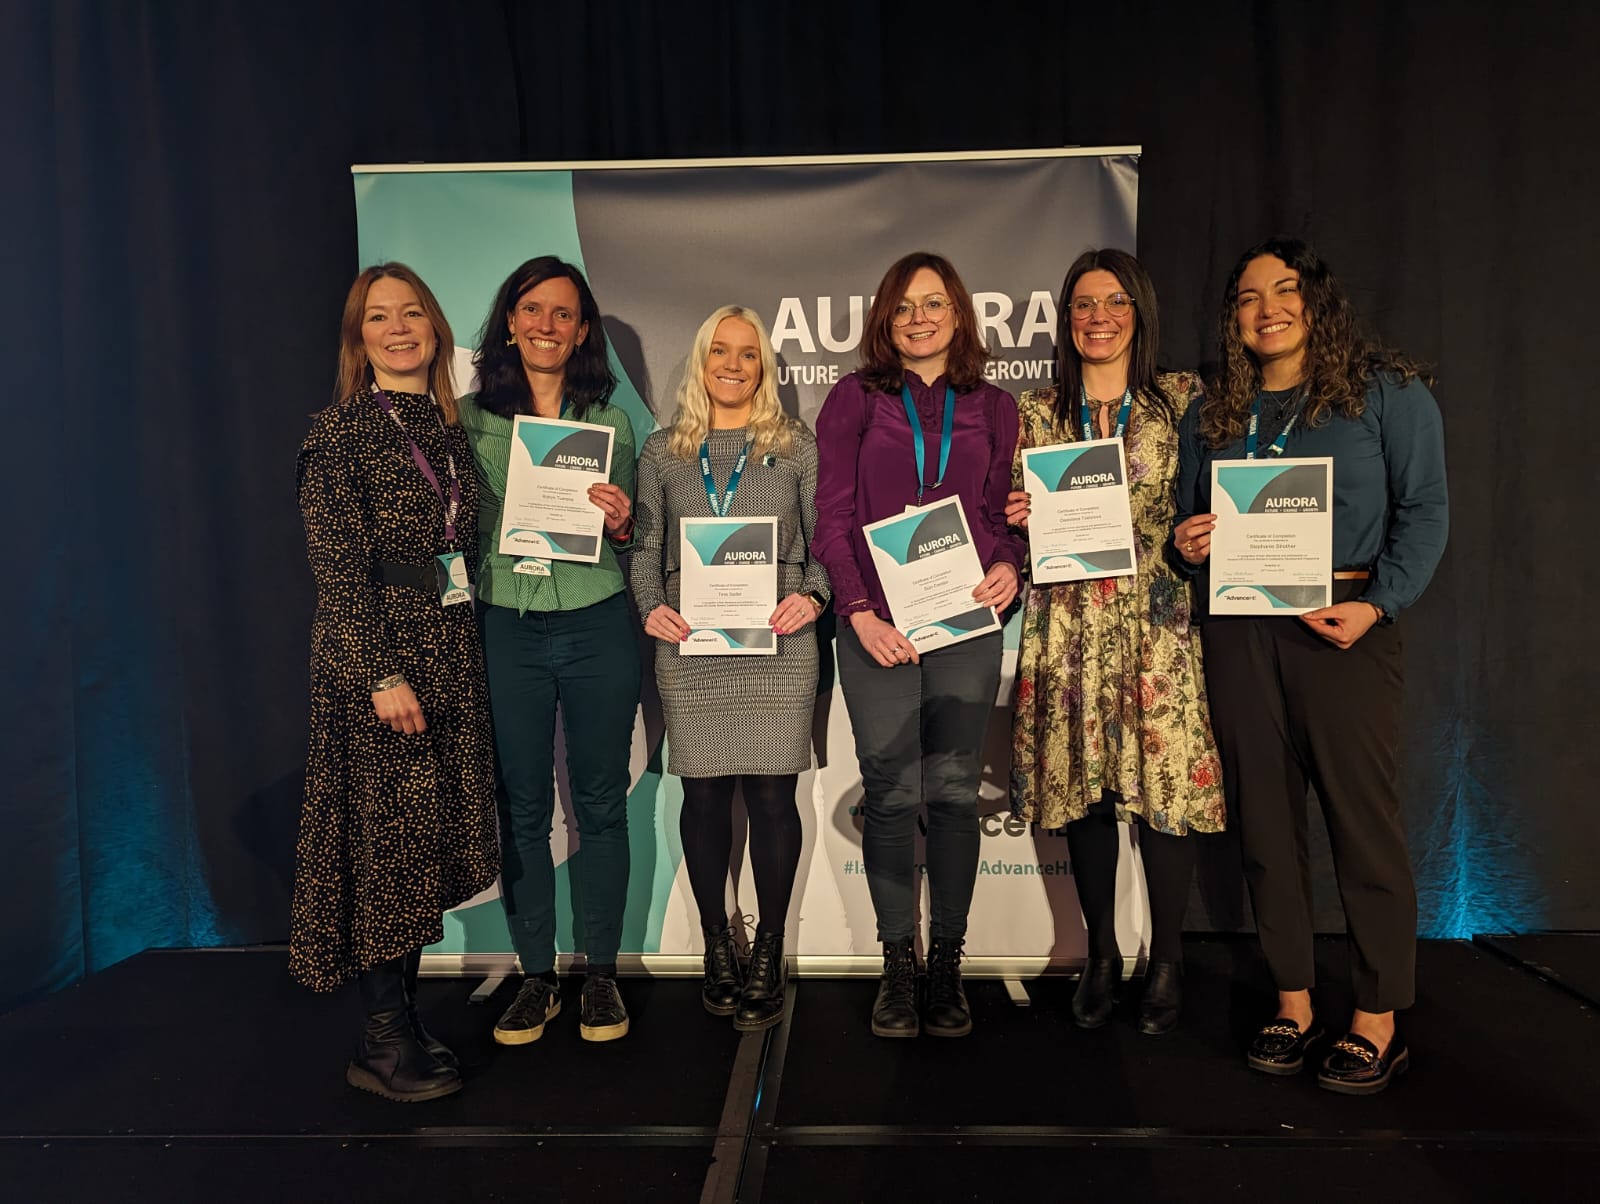 From left to right Heather Fotheringham Robyn Tuerena Tess Sadler Siun Carden Desislava Todorova and Stephanie Strother at the final Aurora programme development day in Edinburgh with their certificates.